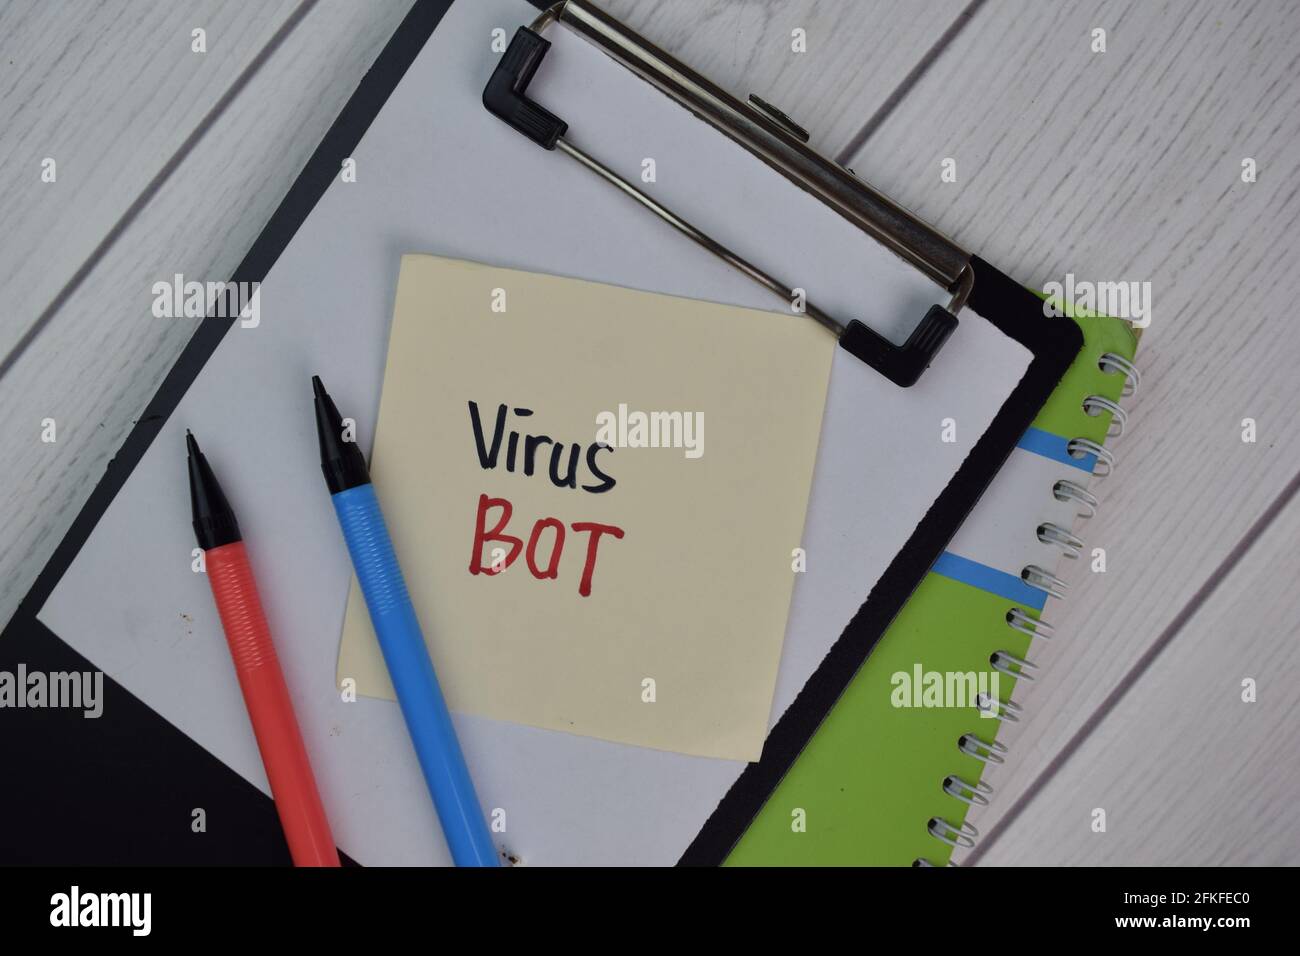 Virus Bot write on sticky notes isolated on Wooden Table. Stock Photo